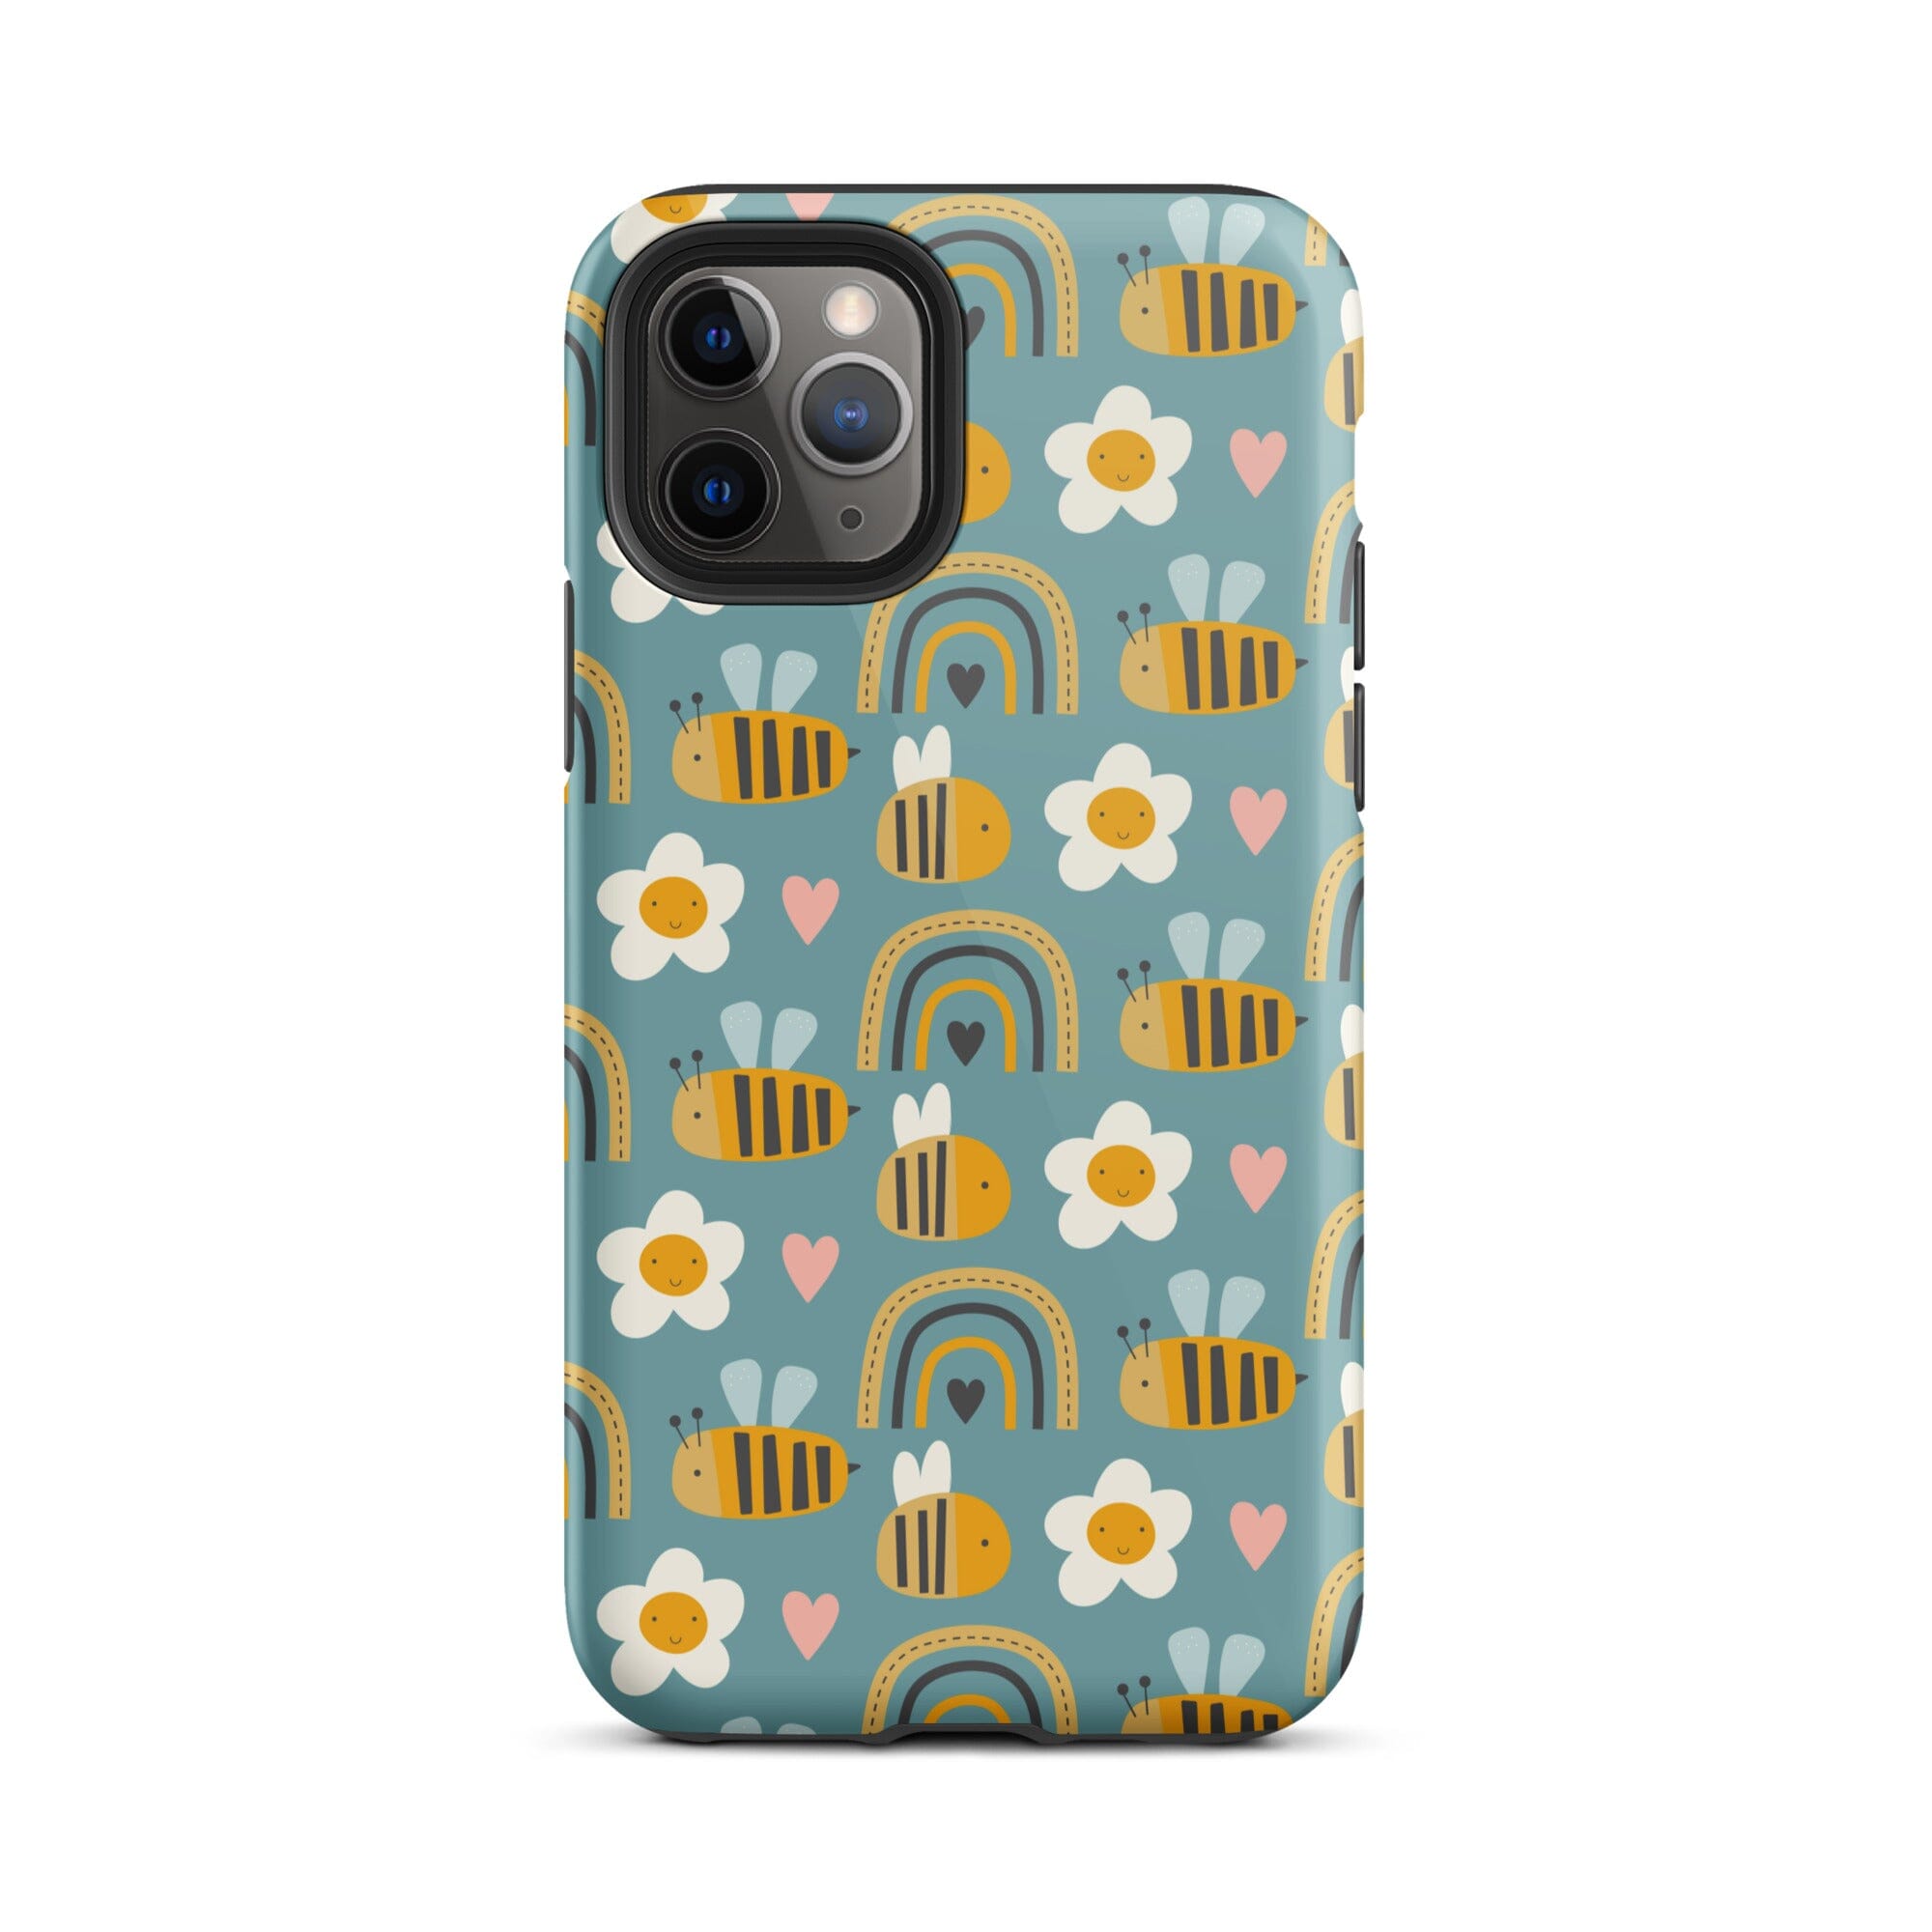 Bumblebee iPhone Case - KBB Exclusive Knitted Belle Boutique iPhone 11 